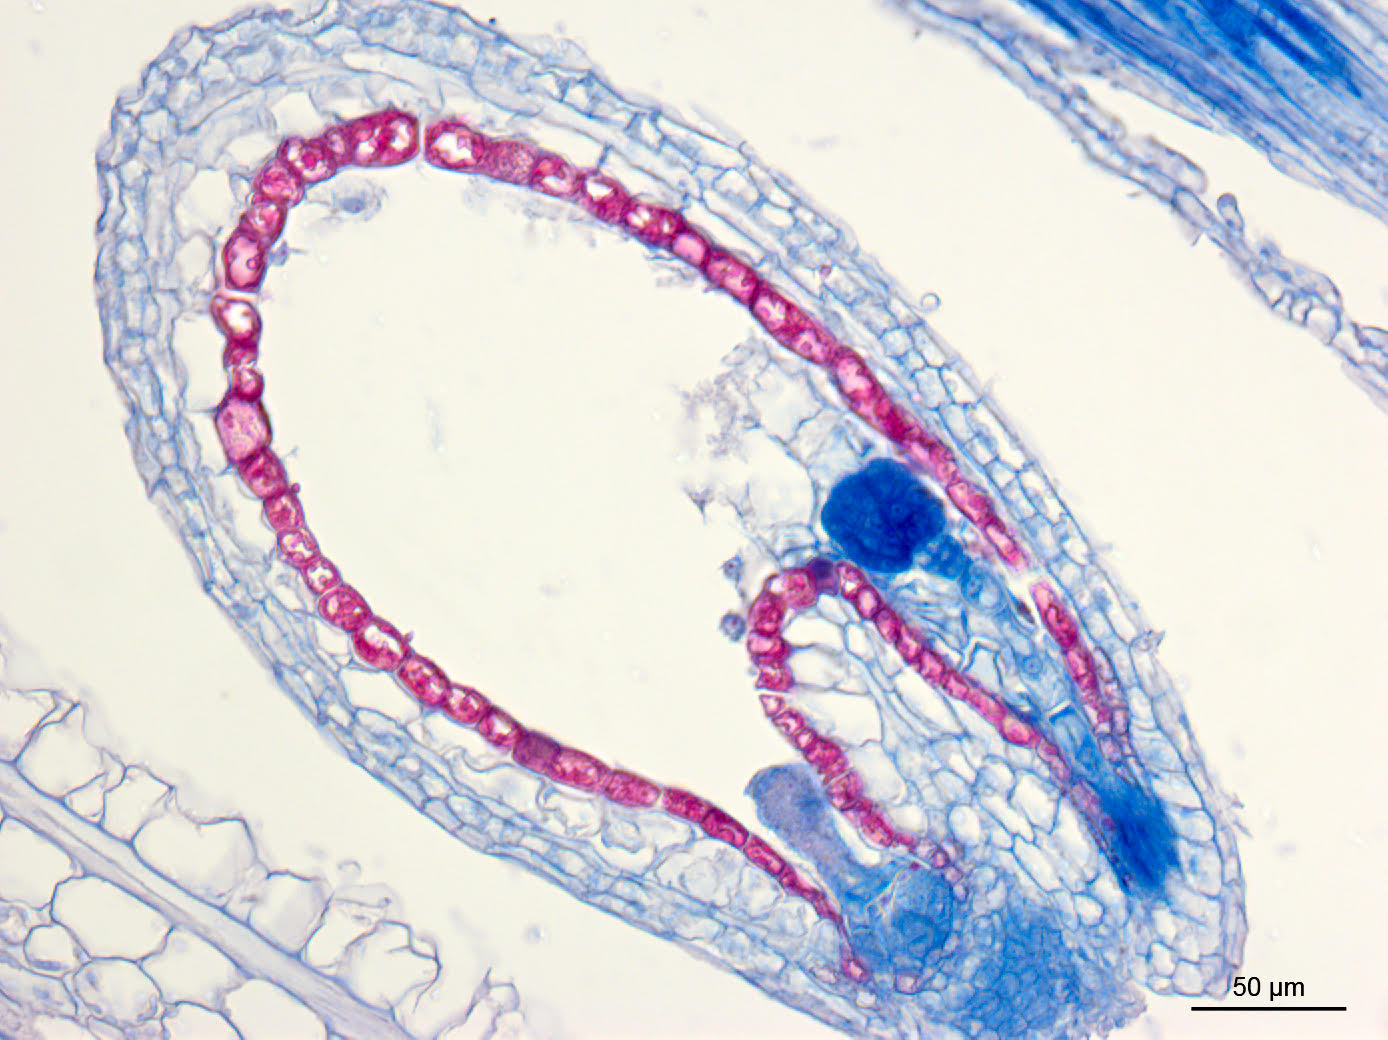 Image of endosperm in A. thaliana seed